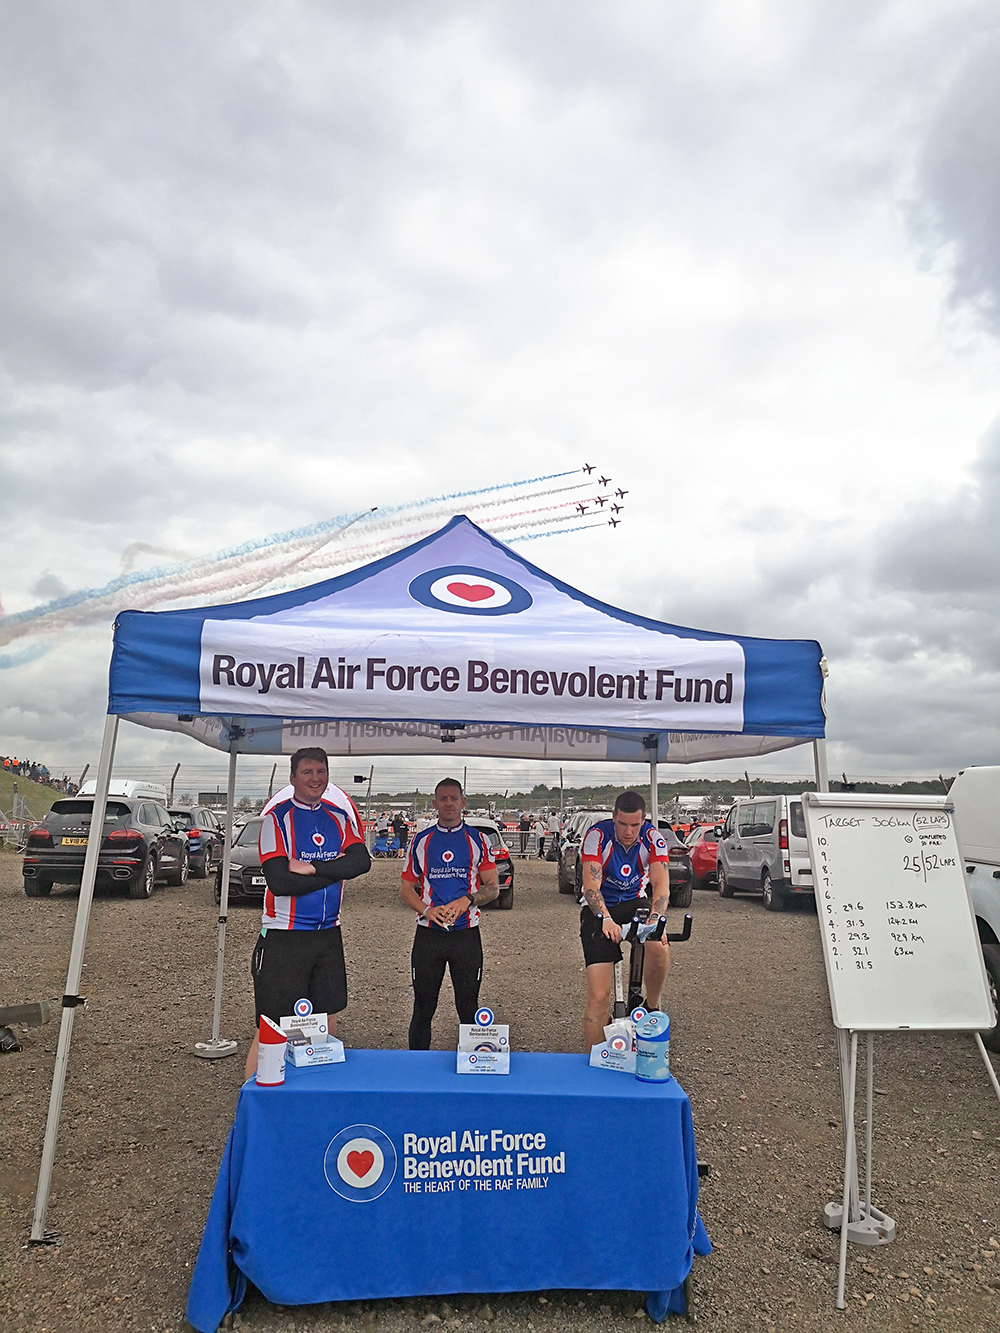 Members of the Tactical Medical Wing Logistics Supply take part in a Spinathon at Silverstone